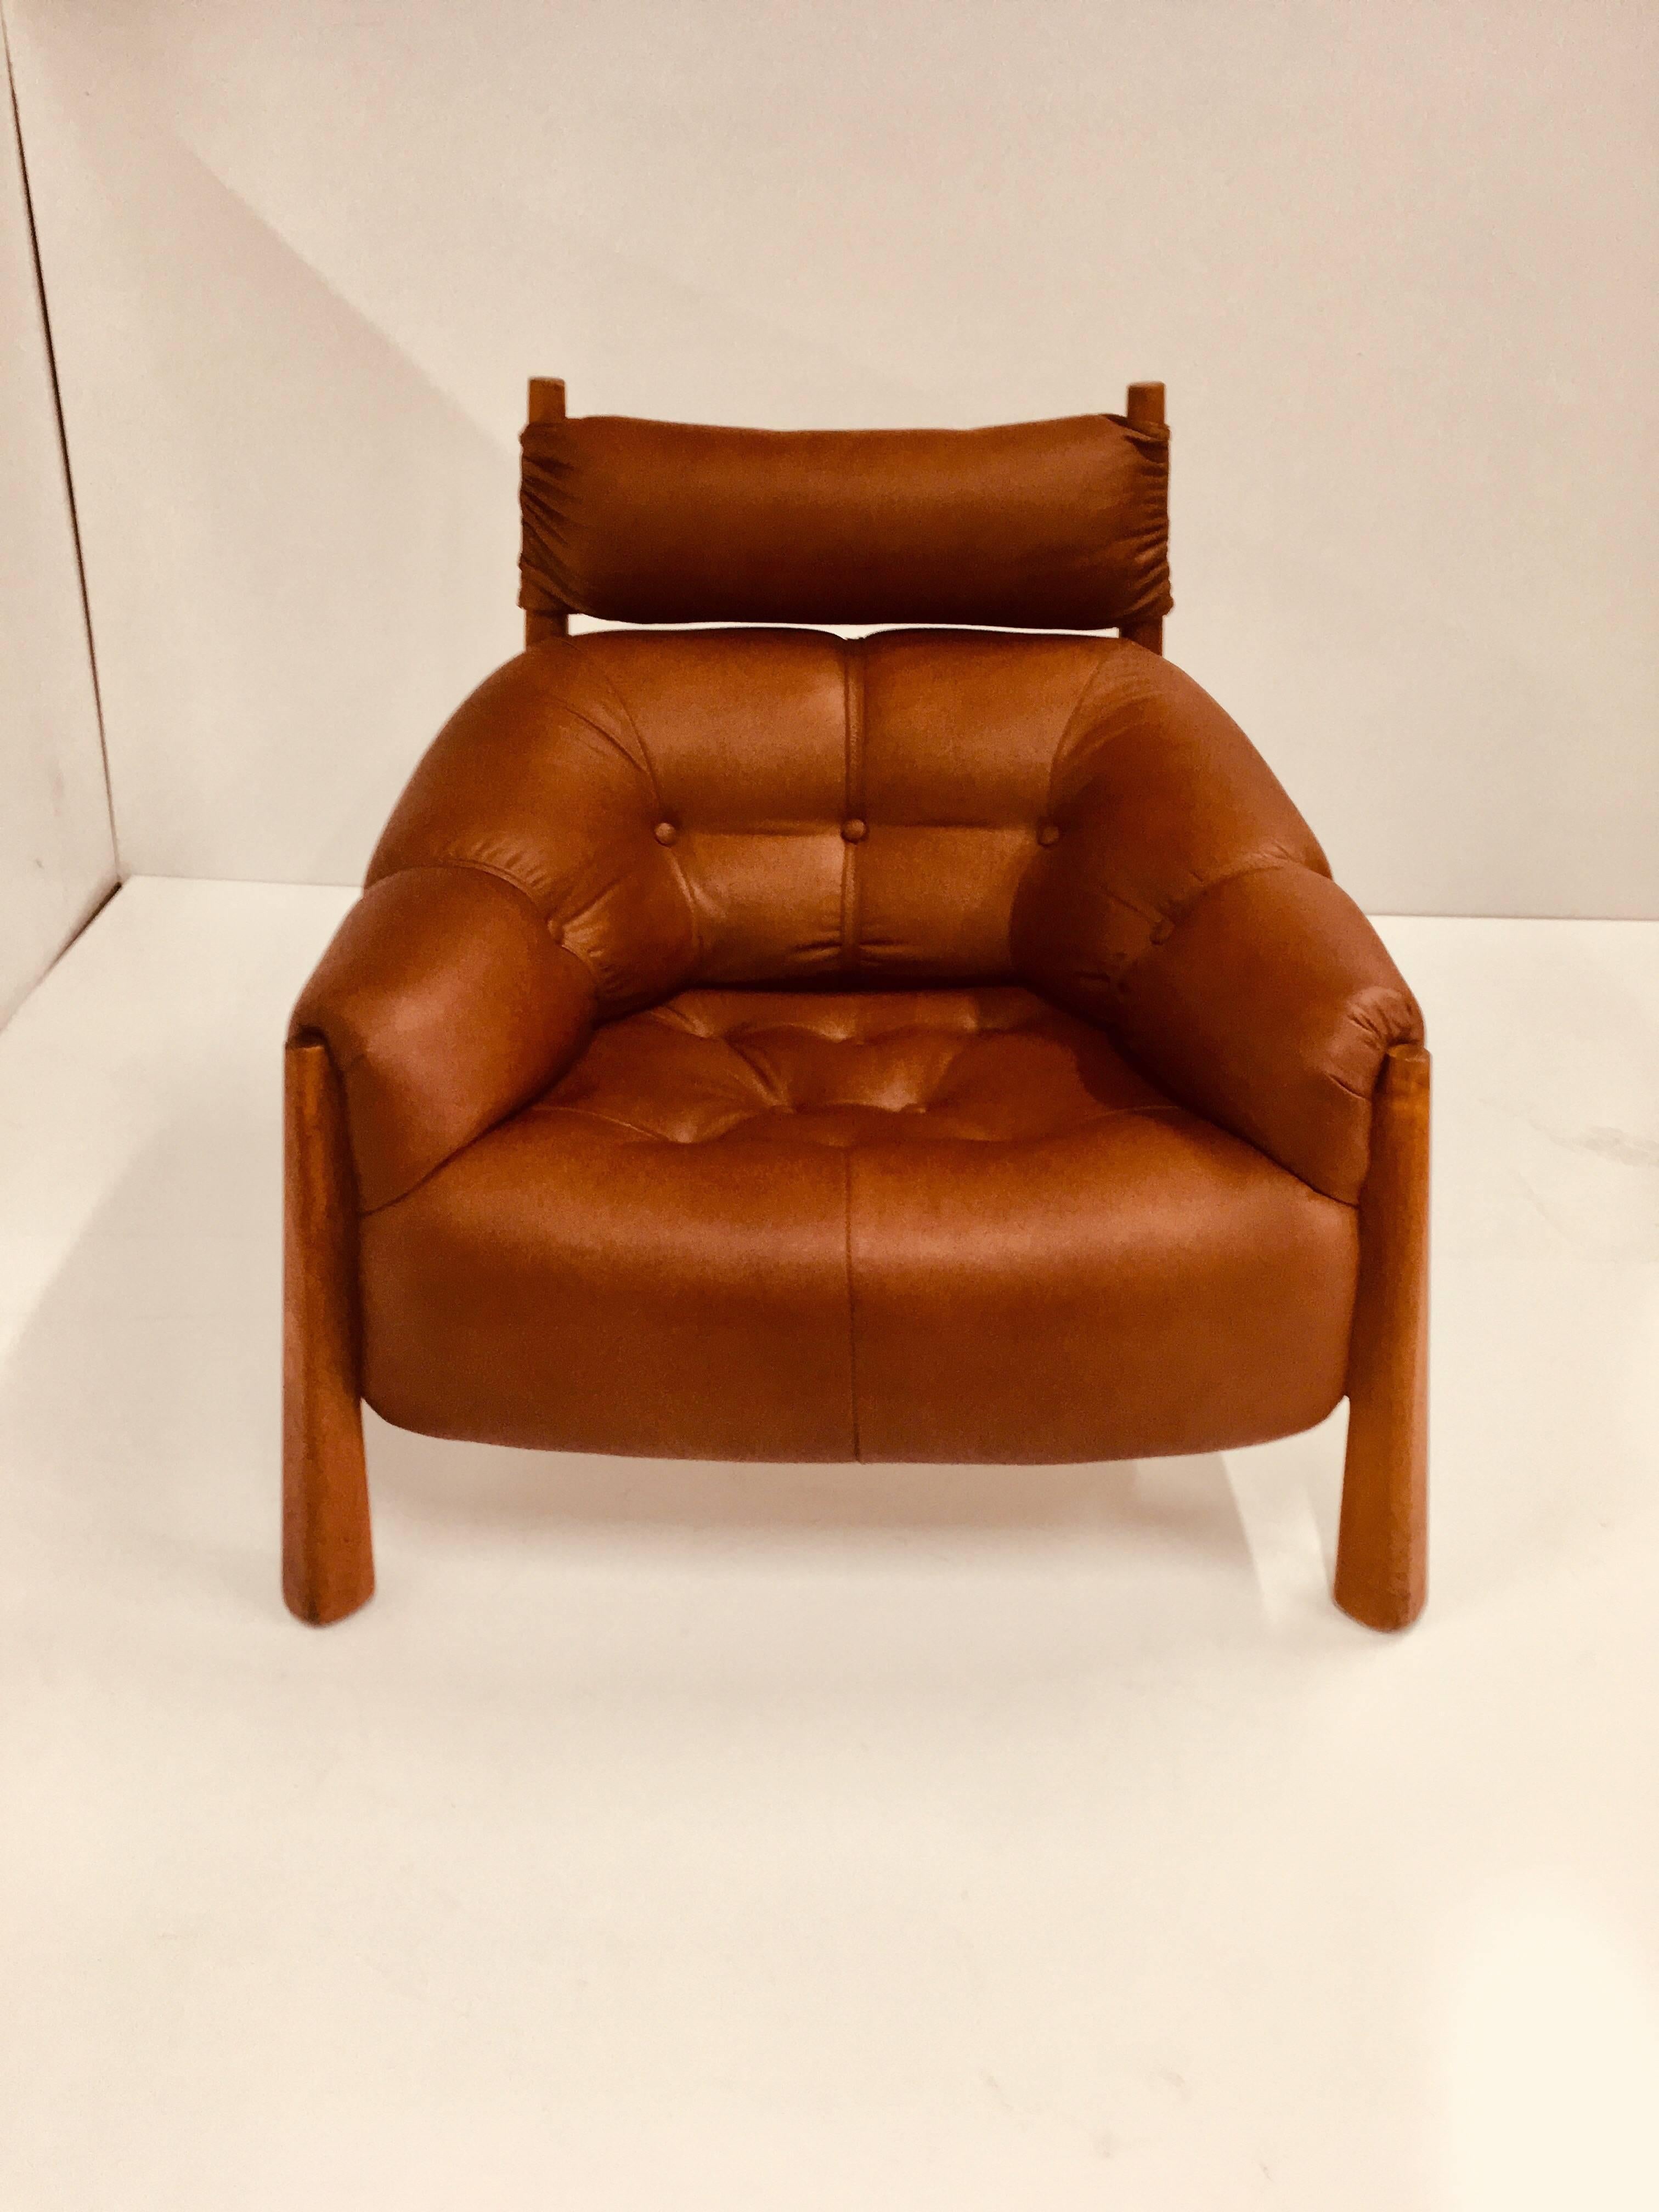 Exceptional quality Brazilian rosewood and leather armchair, 1960s attributed to Percival Lafer newly reupholstered in the finest cognac full grain aniline leather. Extremely comfortable, a truly stunning example of midcentury design. Pair available.